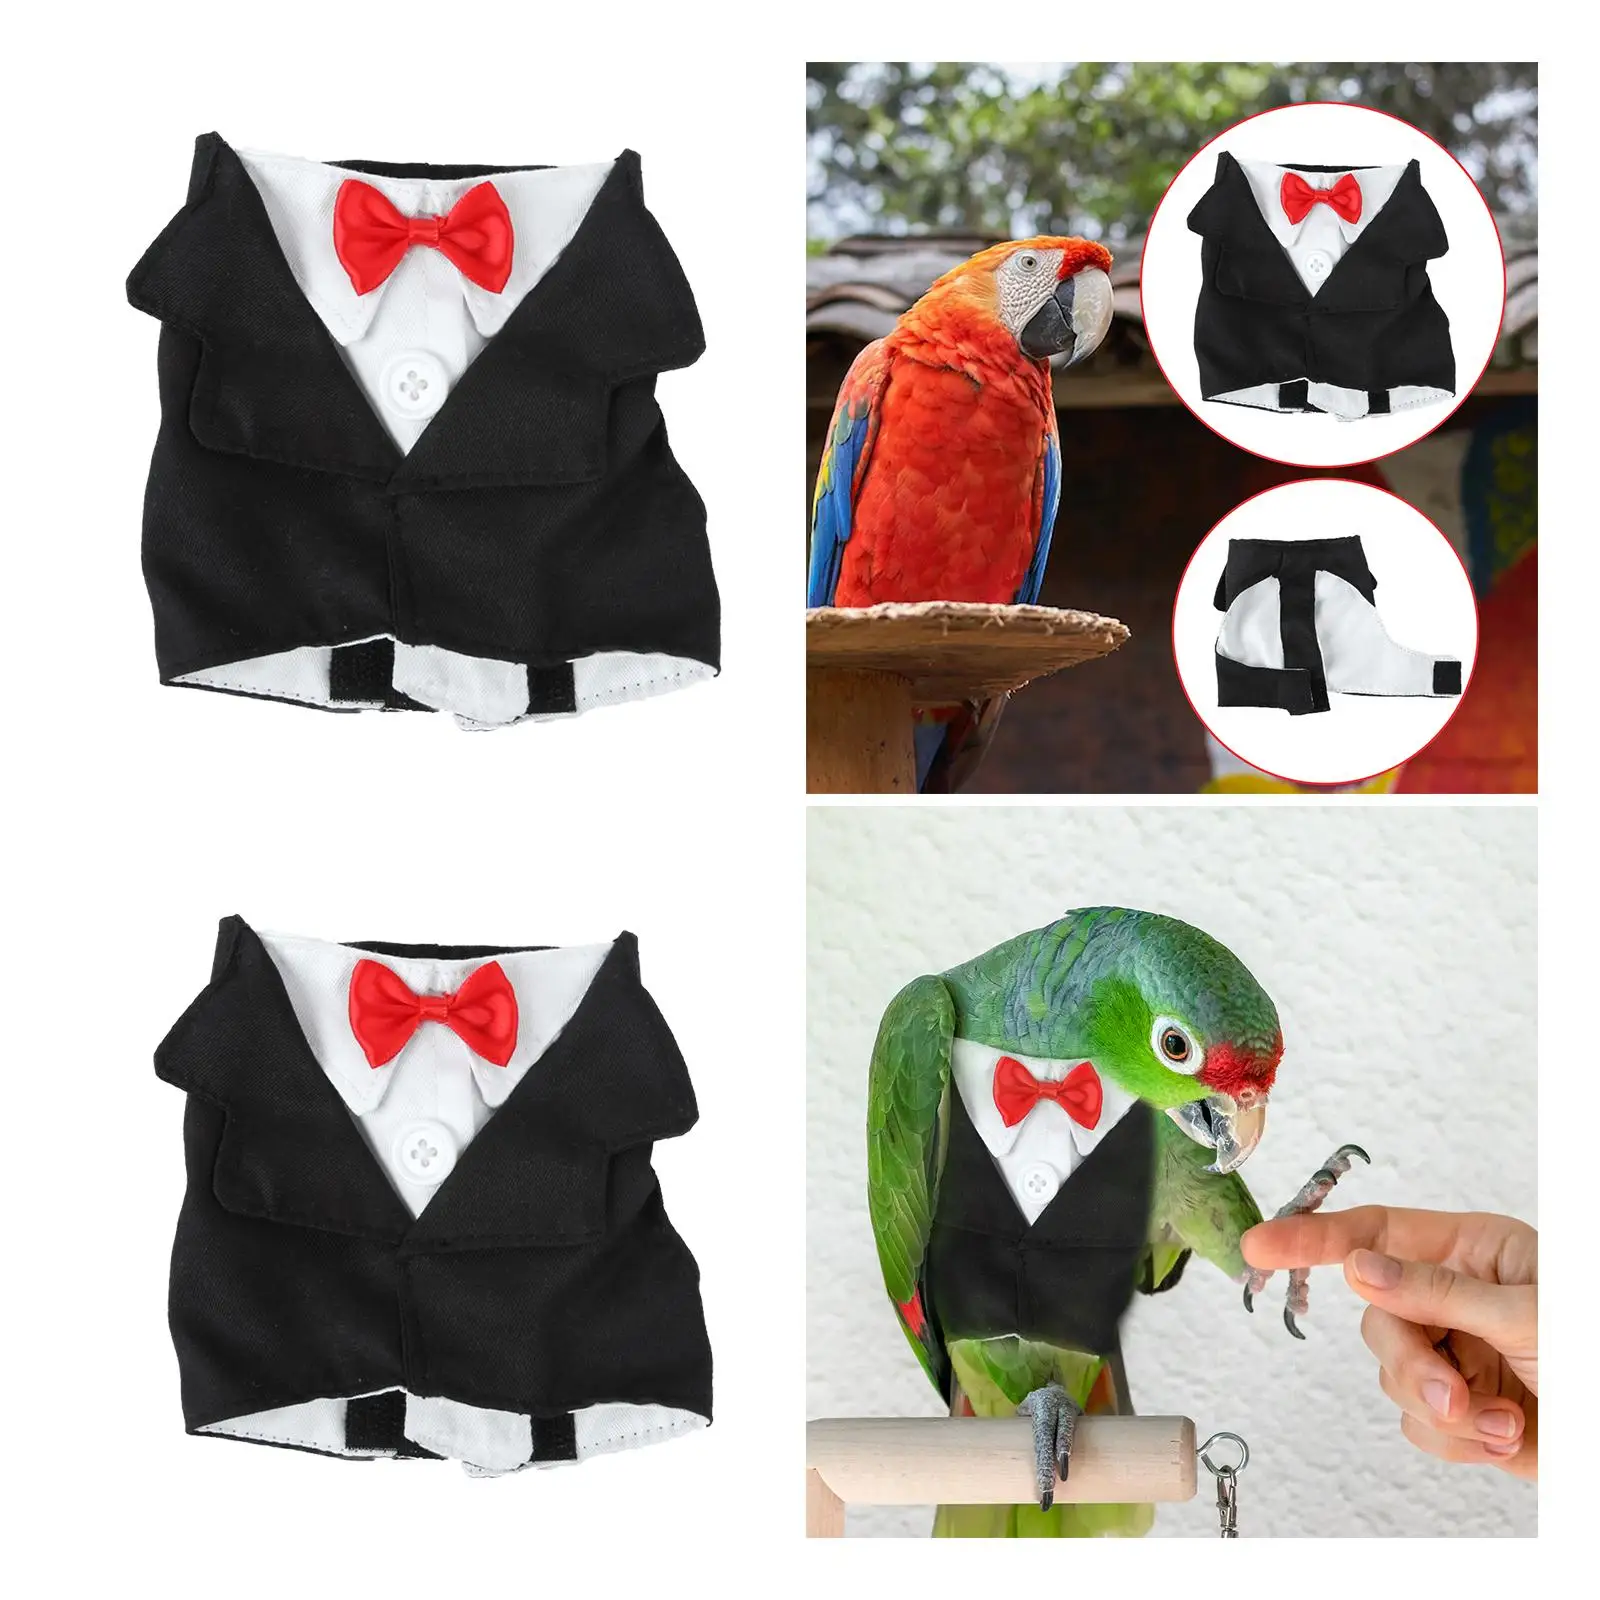 Reusable Birds Clothes Cosplay Pets Supplies Bird Accessories Costume with Bow Tie Parrots Suit Uniform for African Greys Budgie